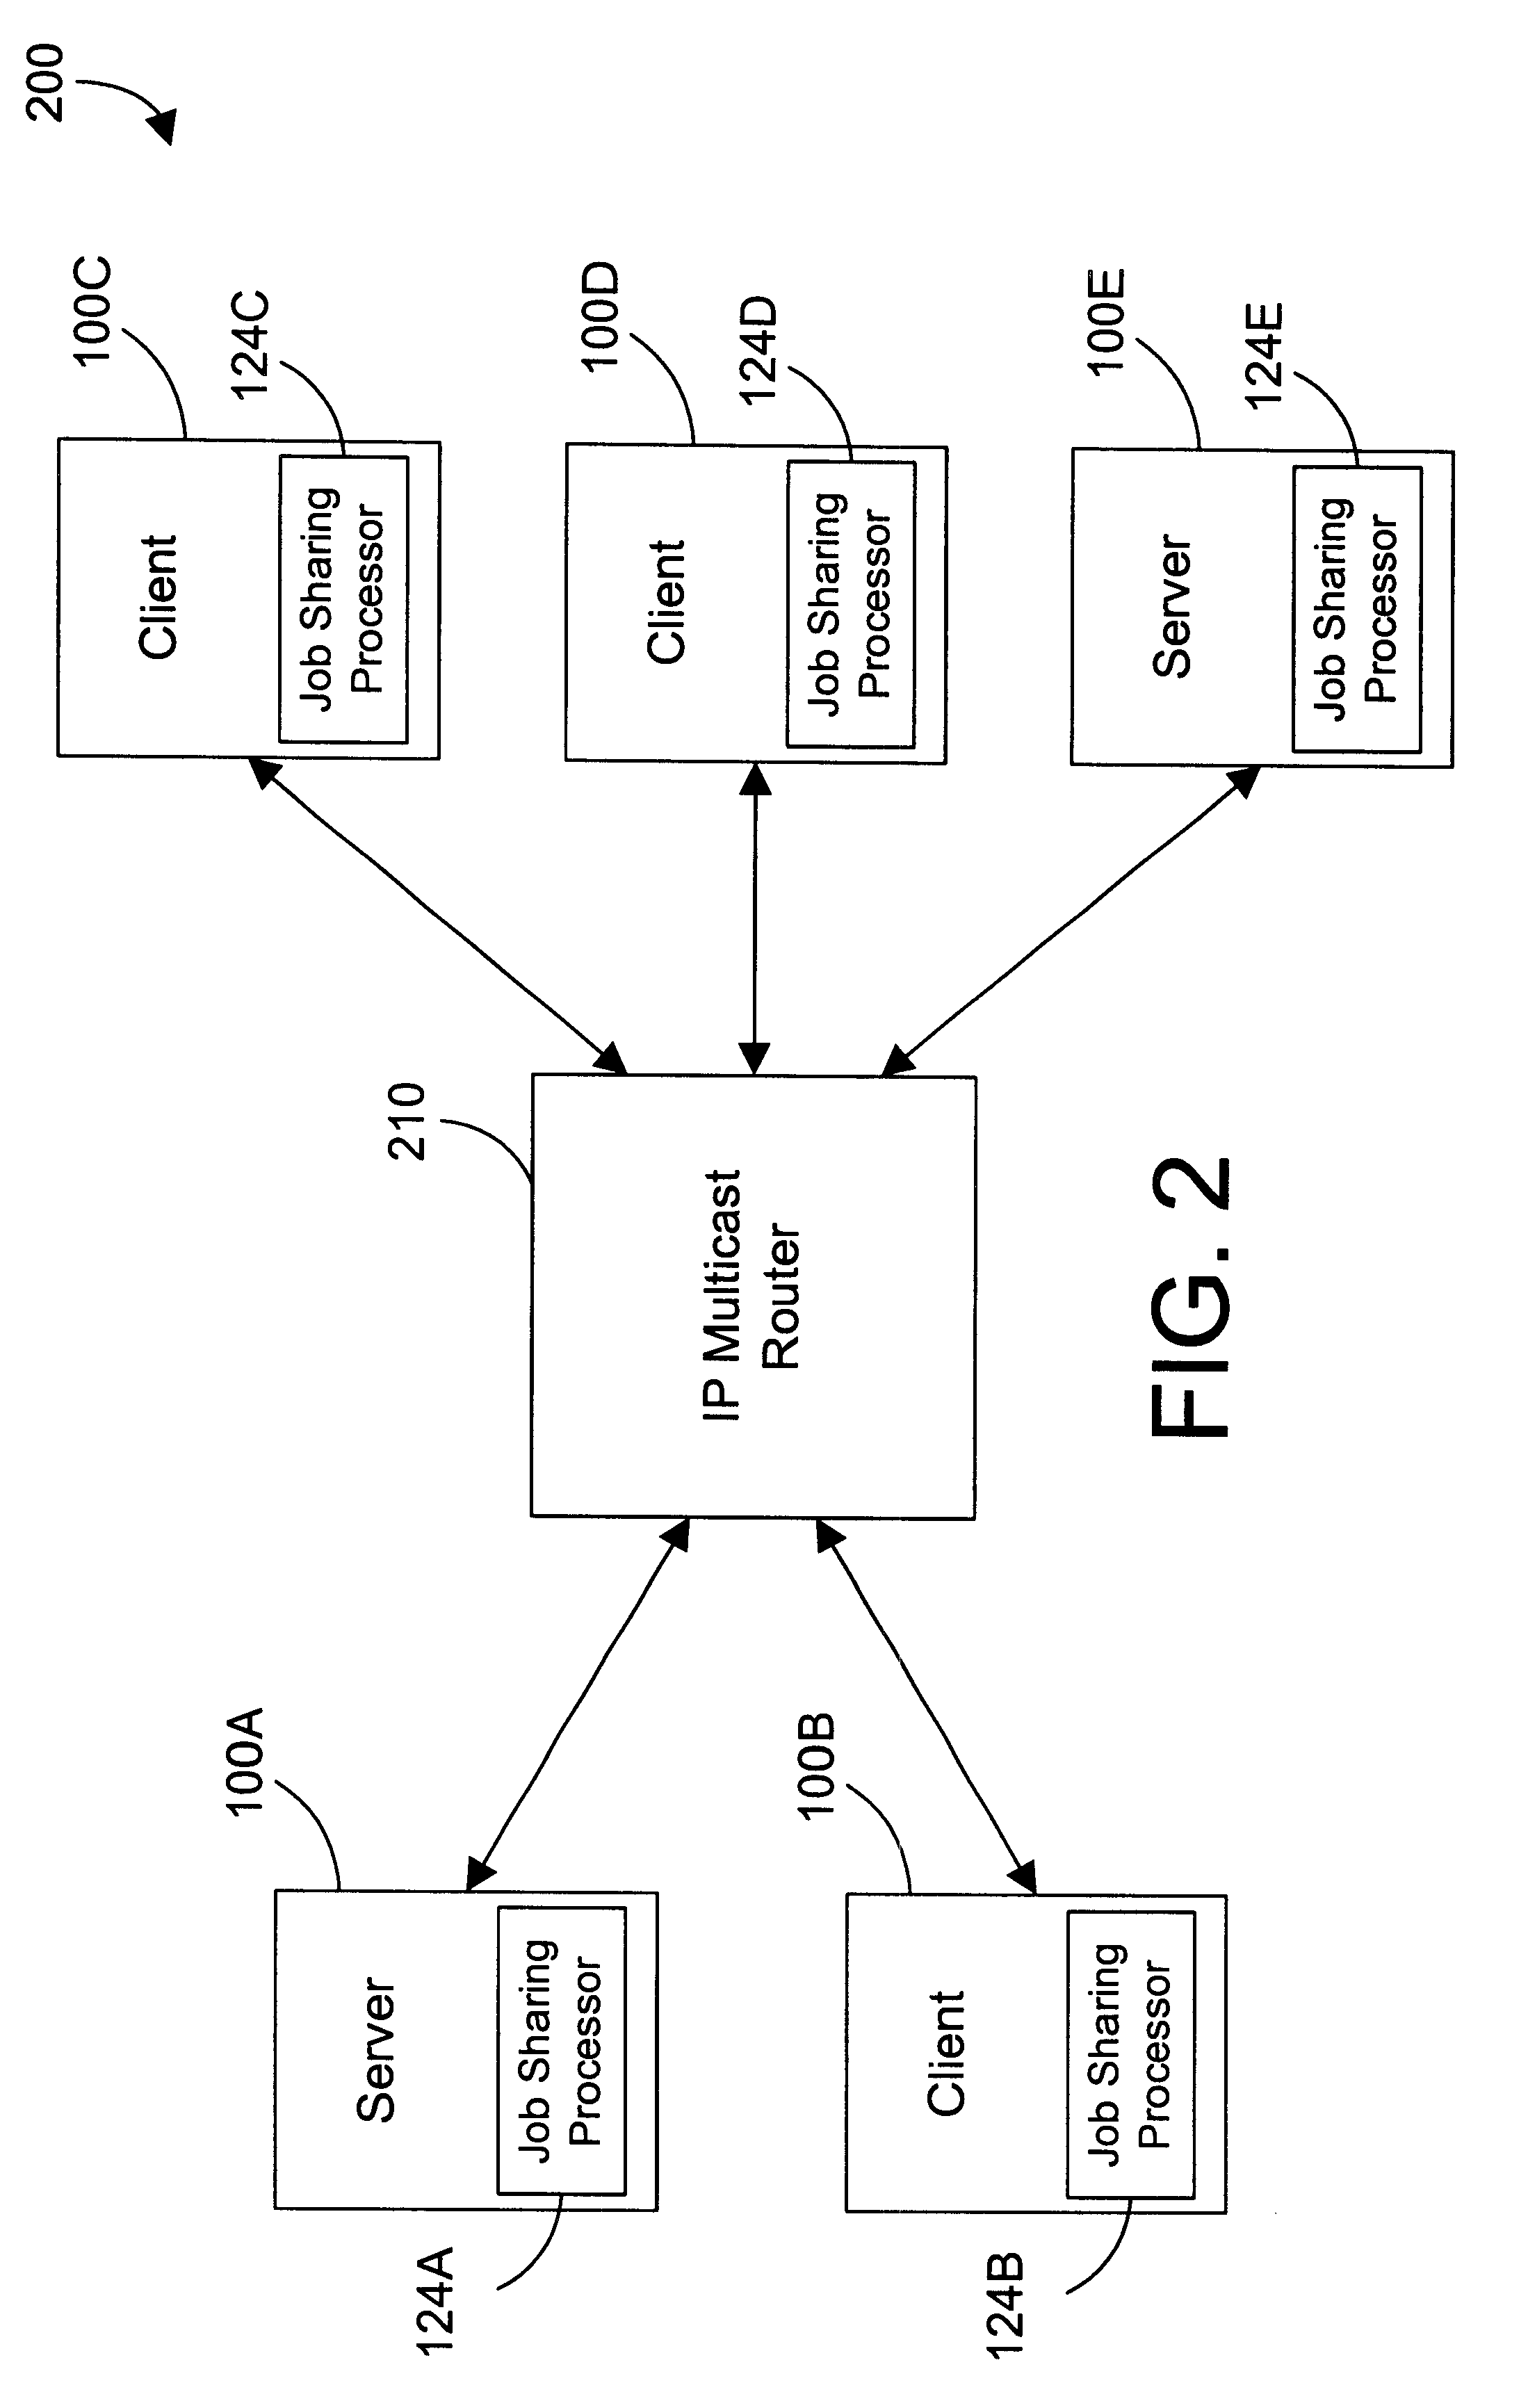 Computer system and method for sharing a job with other computers on a computer network using IP multicast